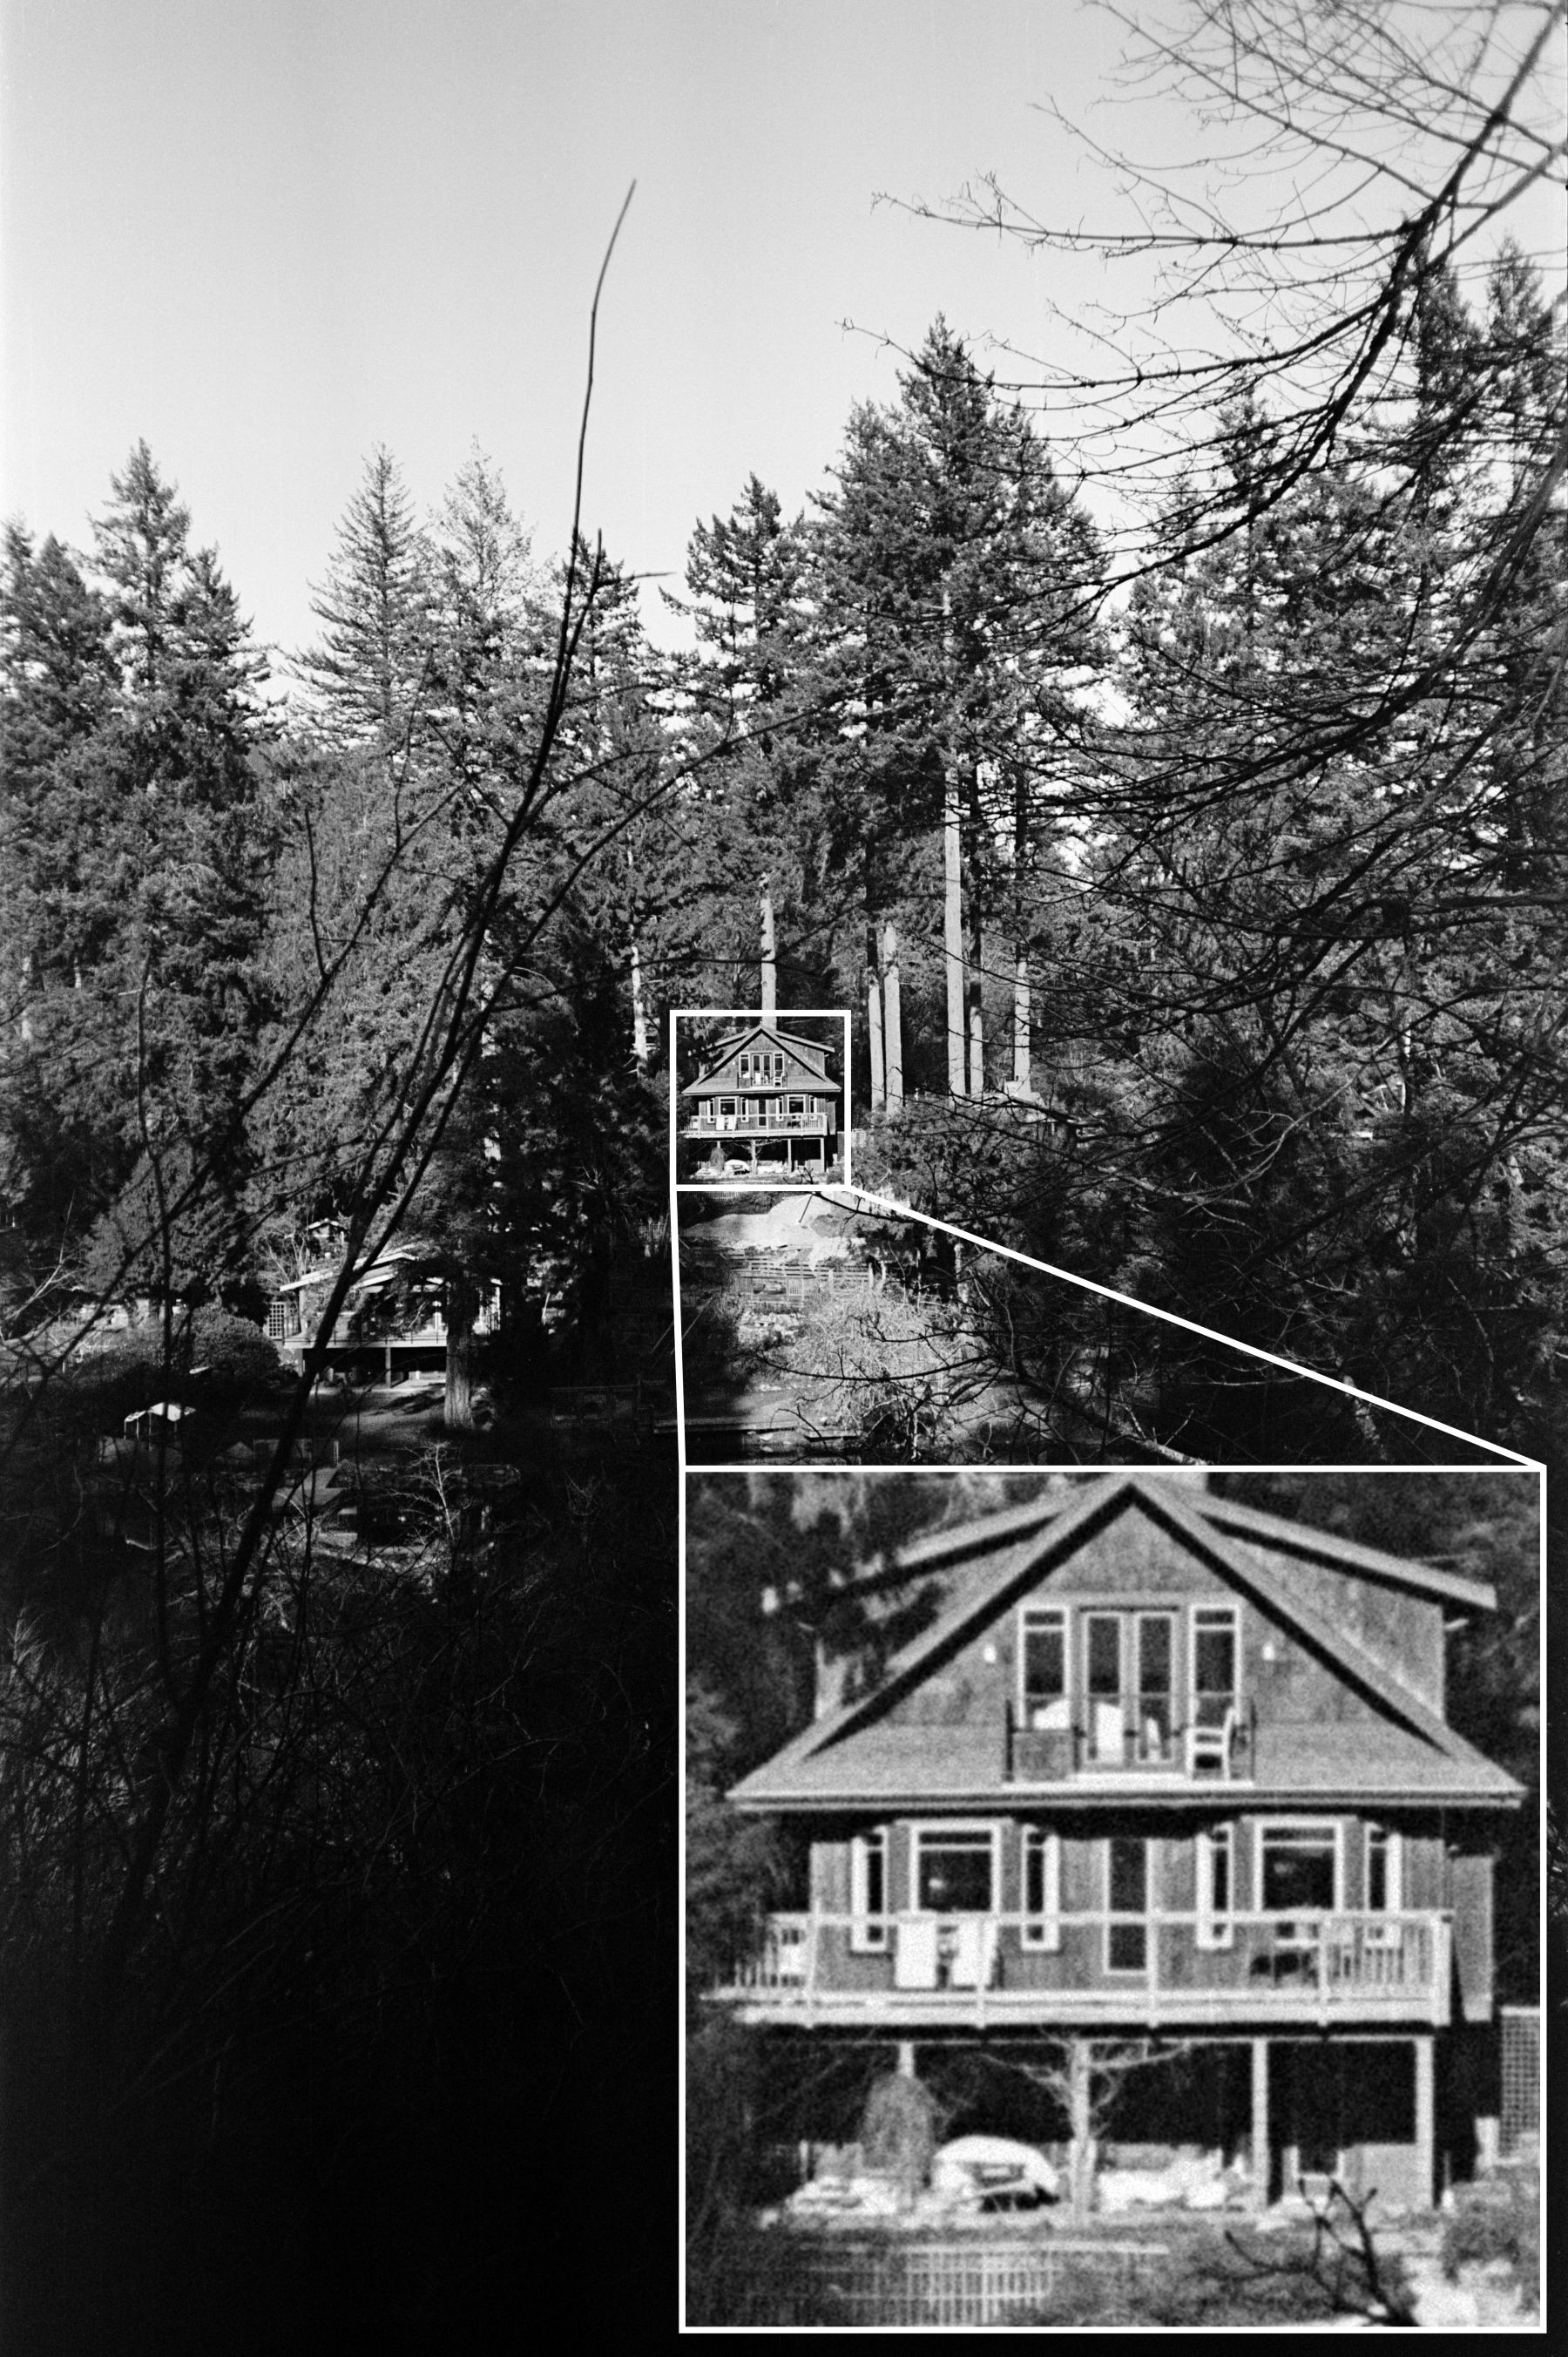 A photo of a house in the distance across a forest creek with a ~6x enlargement that demonstrate the extreme fine nature of the P30 grain